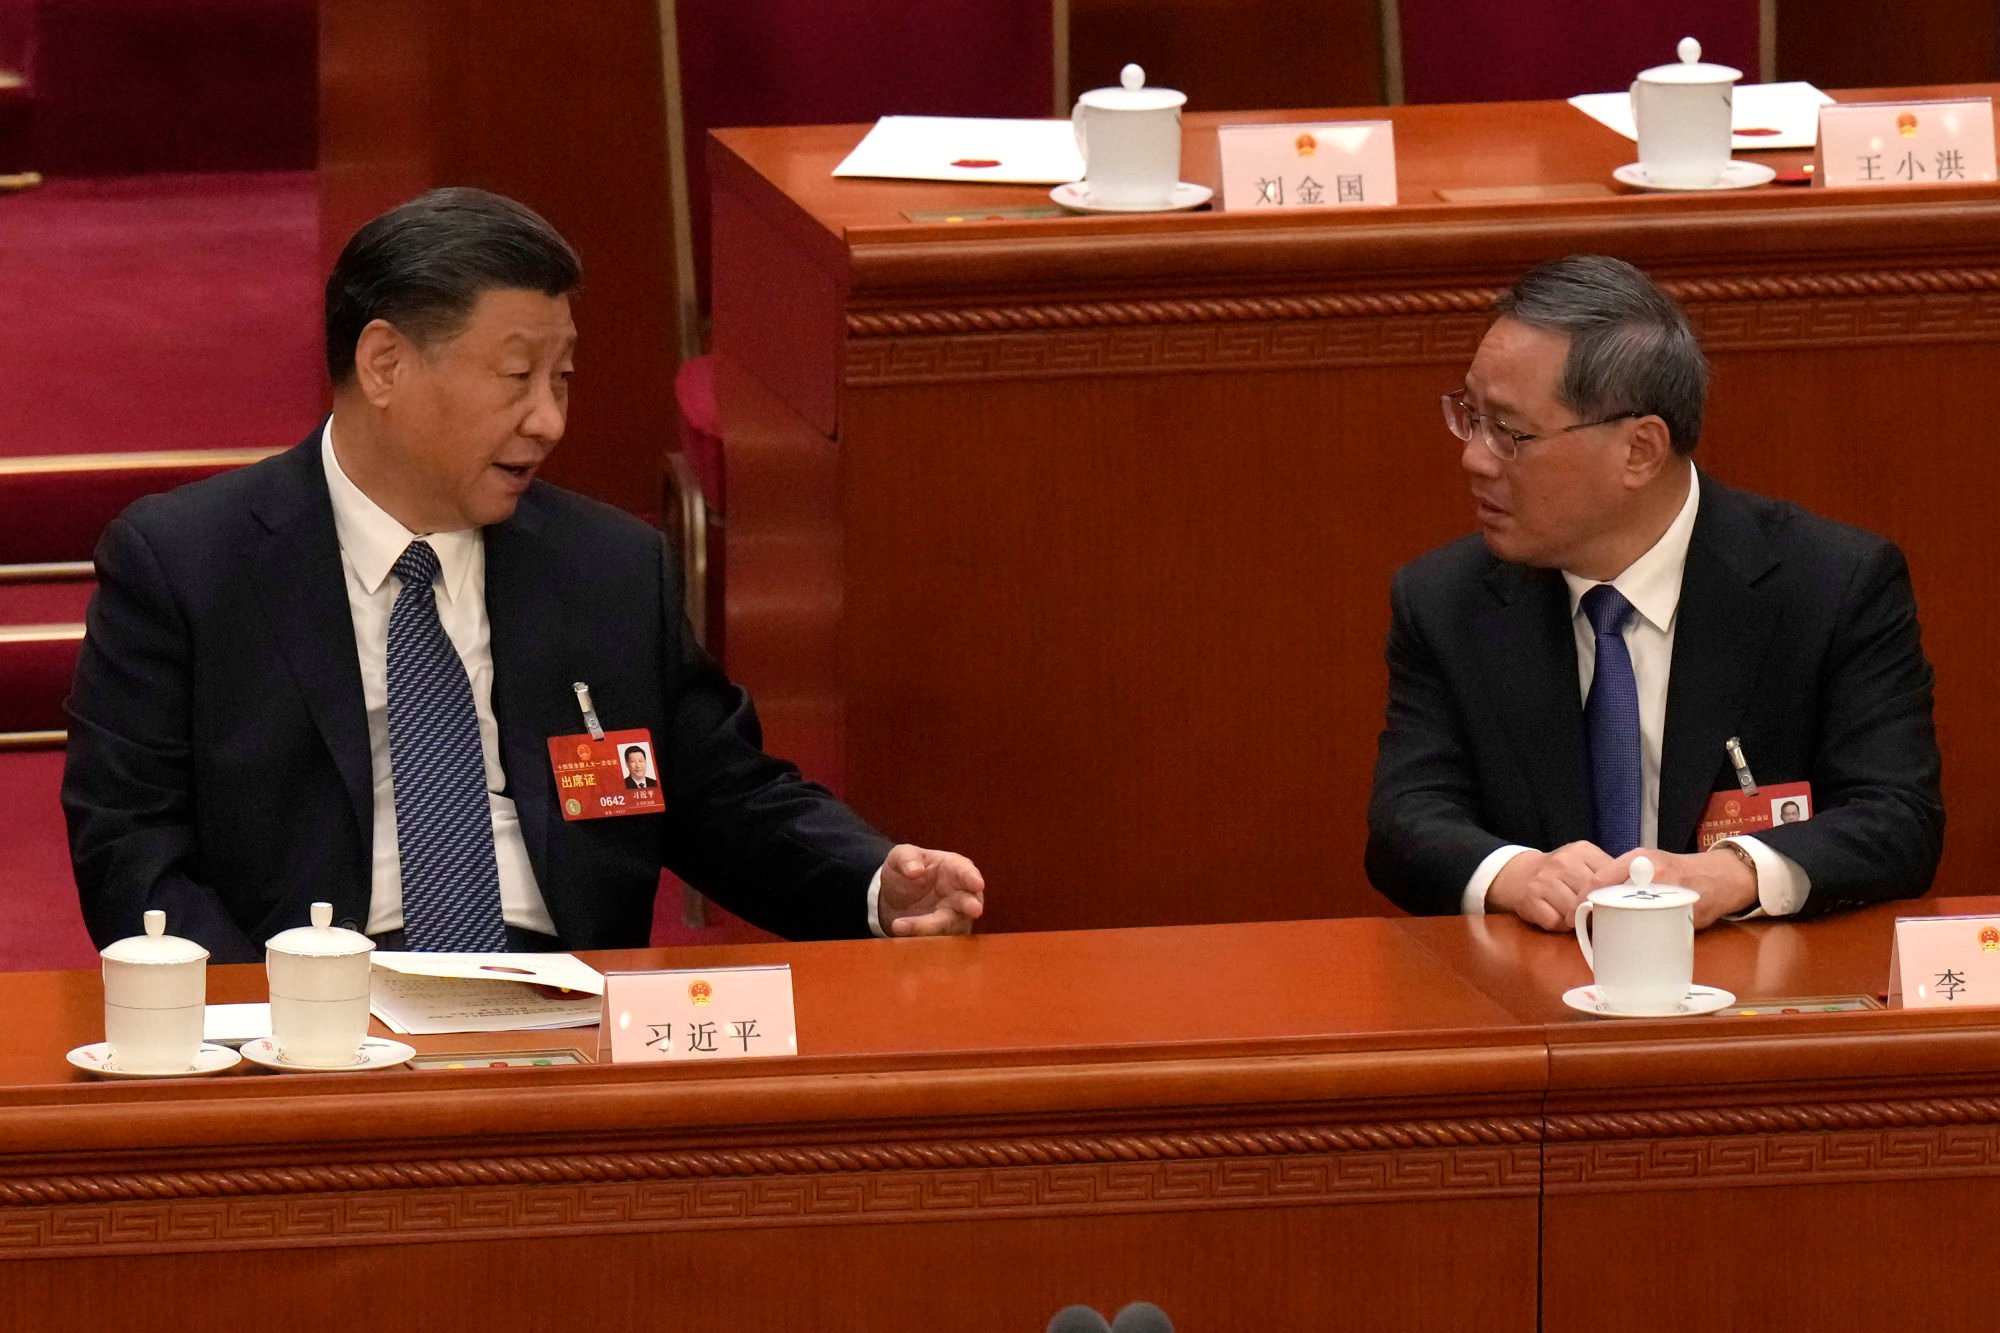 Chinese President Xi Jinping (left) confers with Premier Li Qiang during a session of China’s National People’s Congress last year. Photo: AP